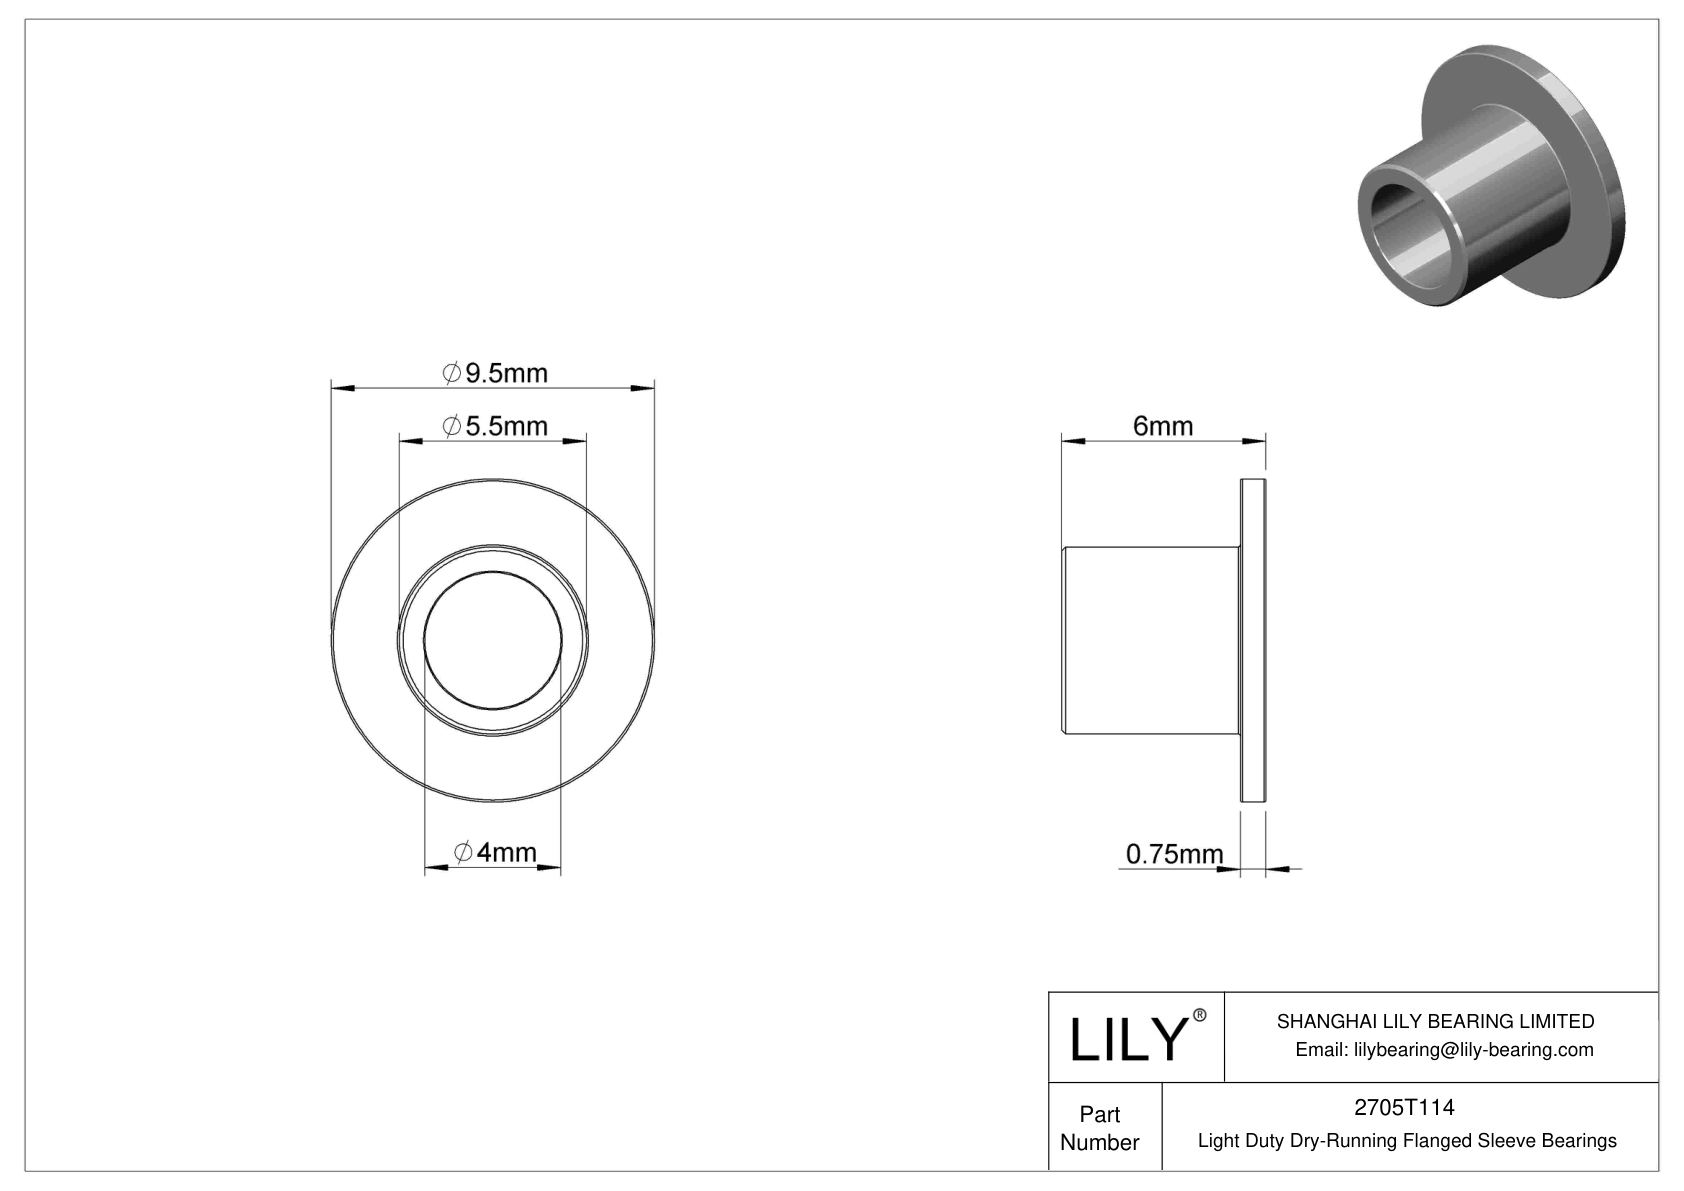 CHAFTBBE Light Duty Dry-Running Flanged Sleeve Bearings cad drawing